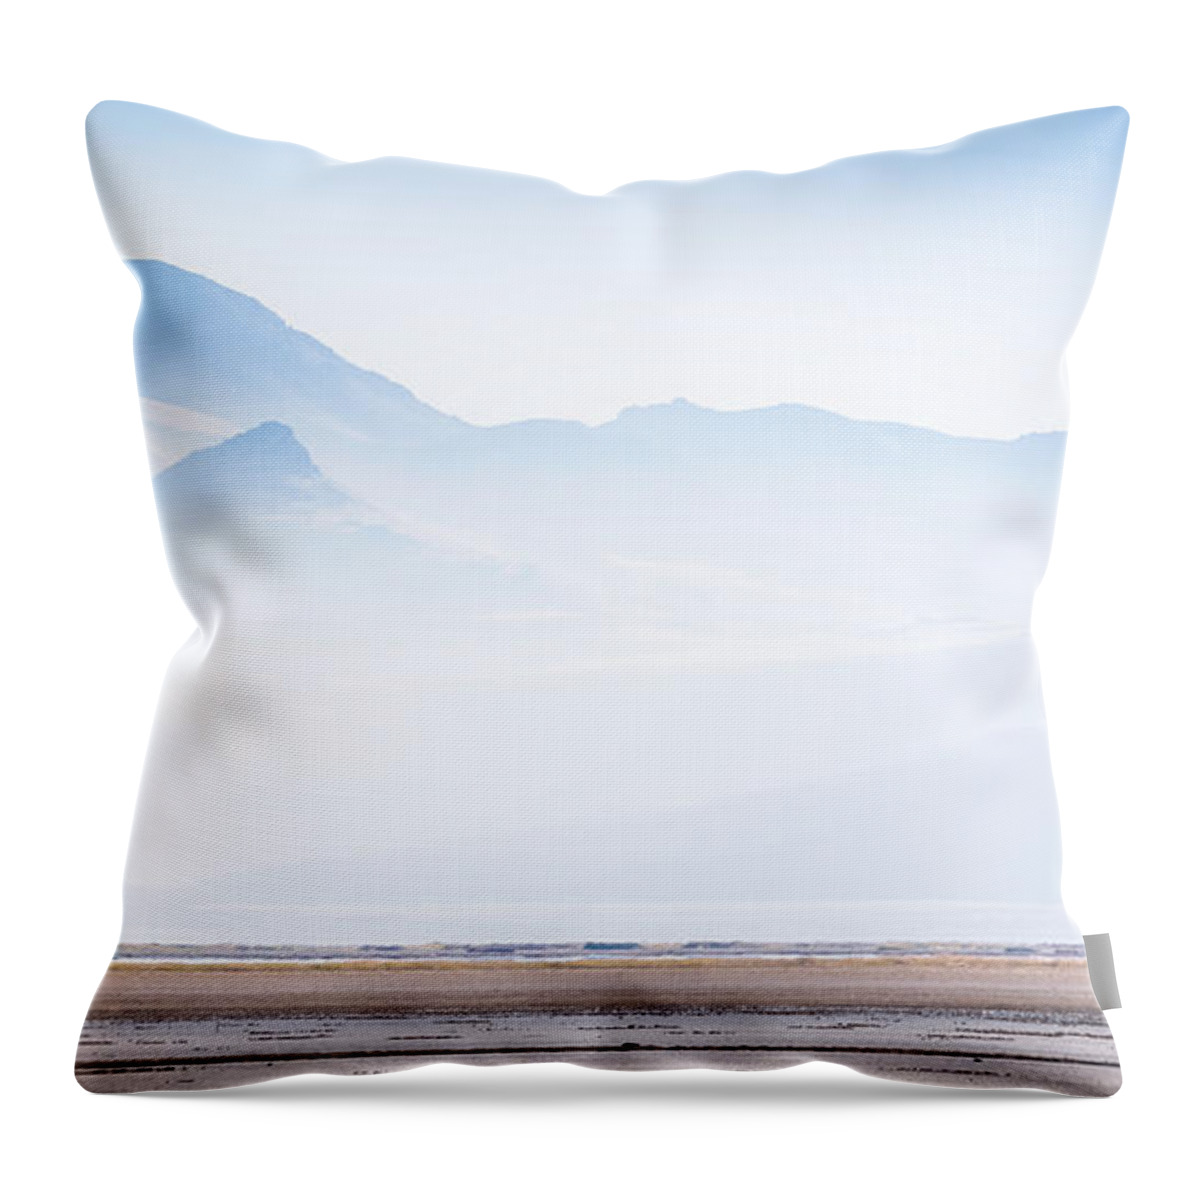 Antelope Island Throw Pillow featuring the photograph Alone by Dave Koch